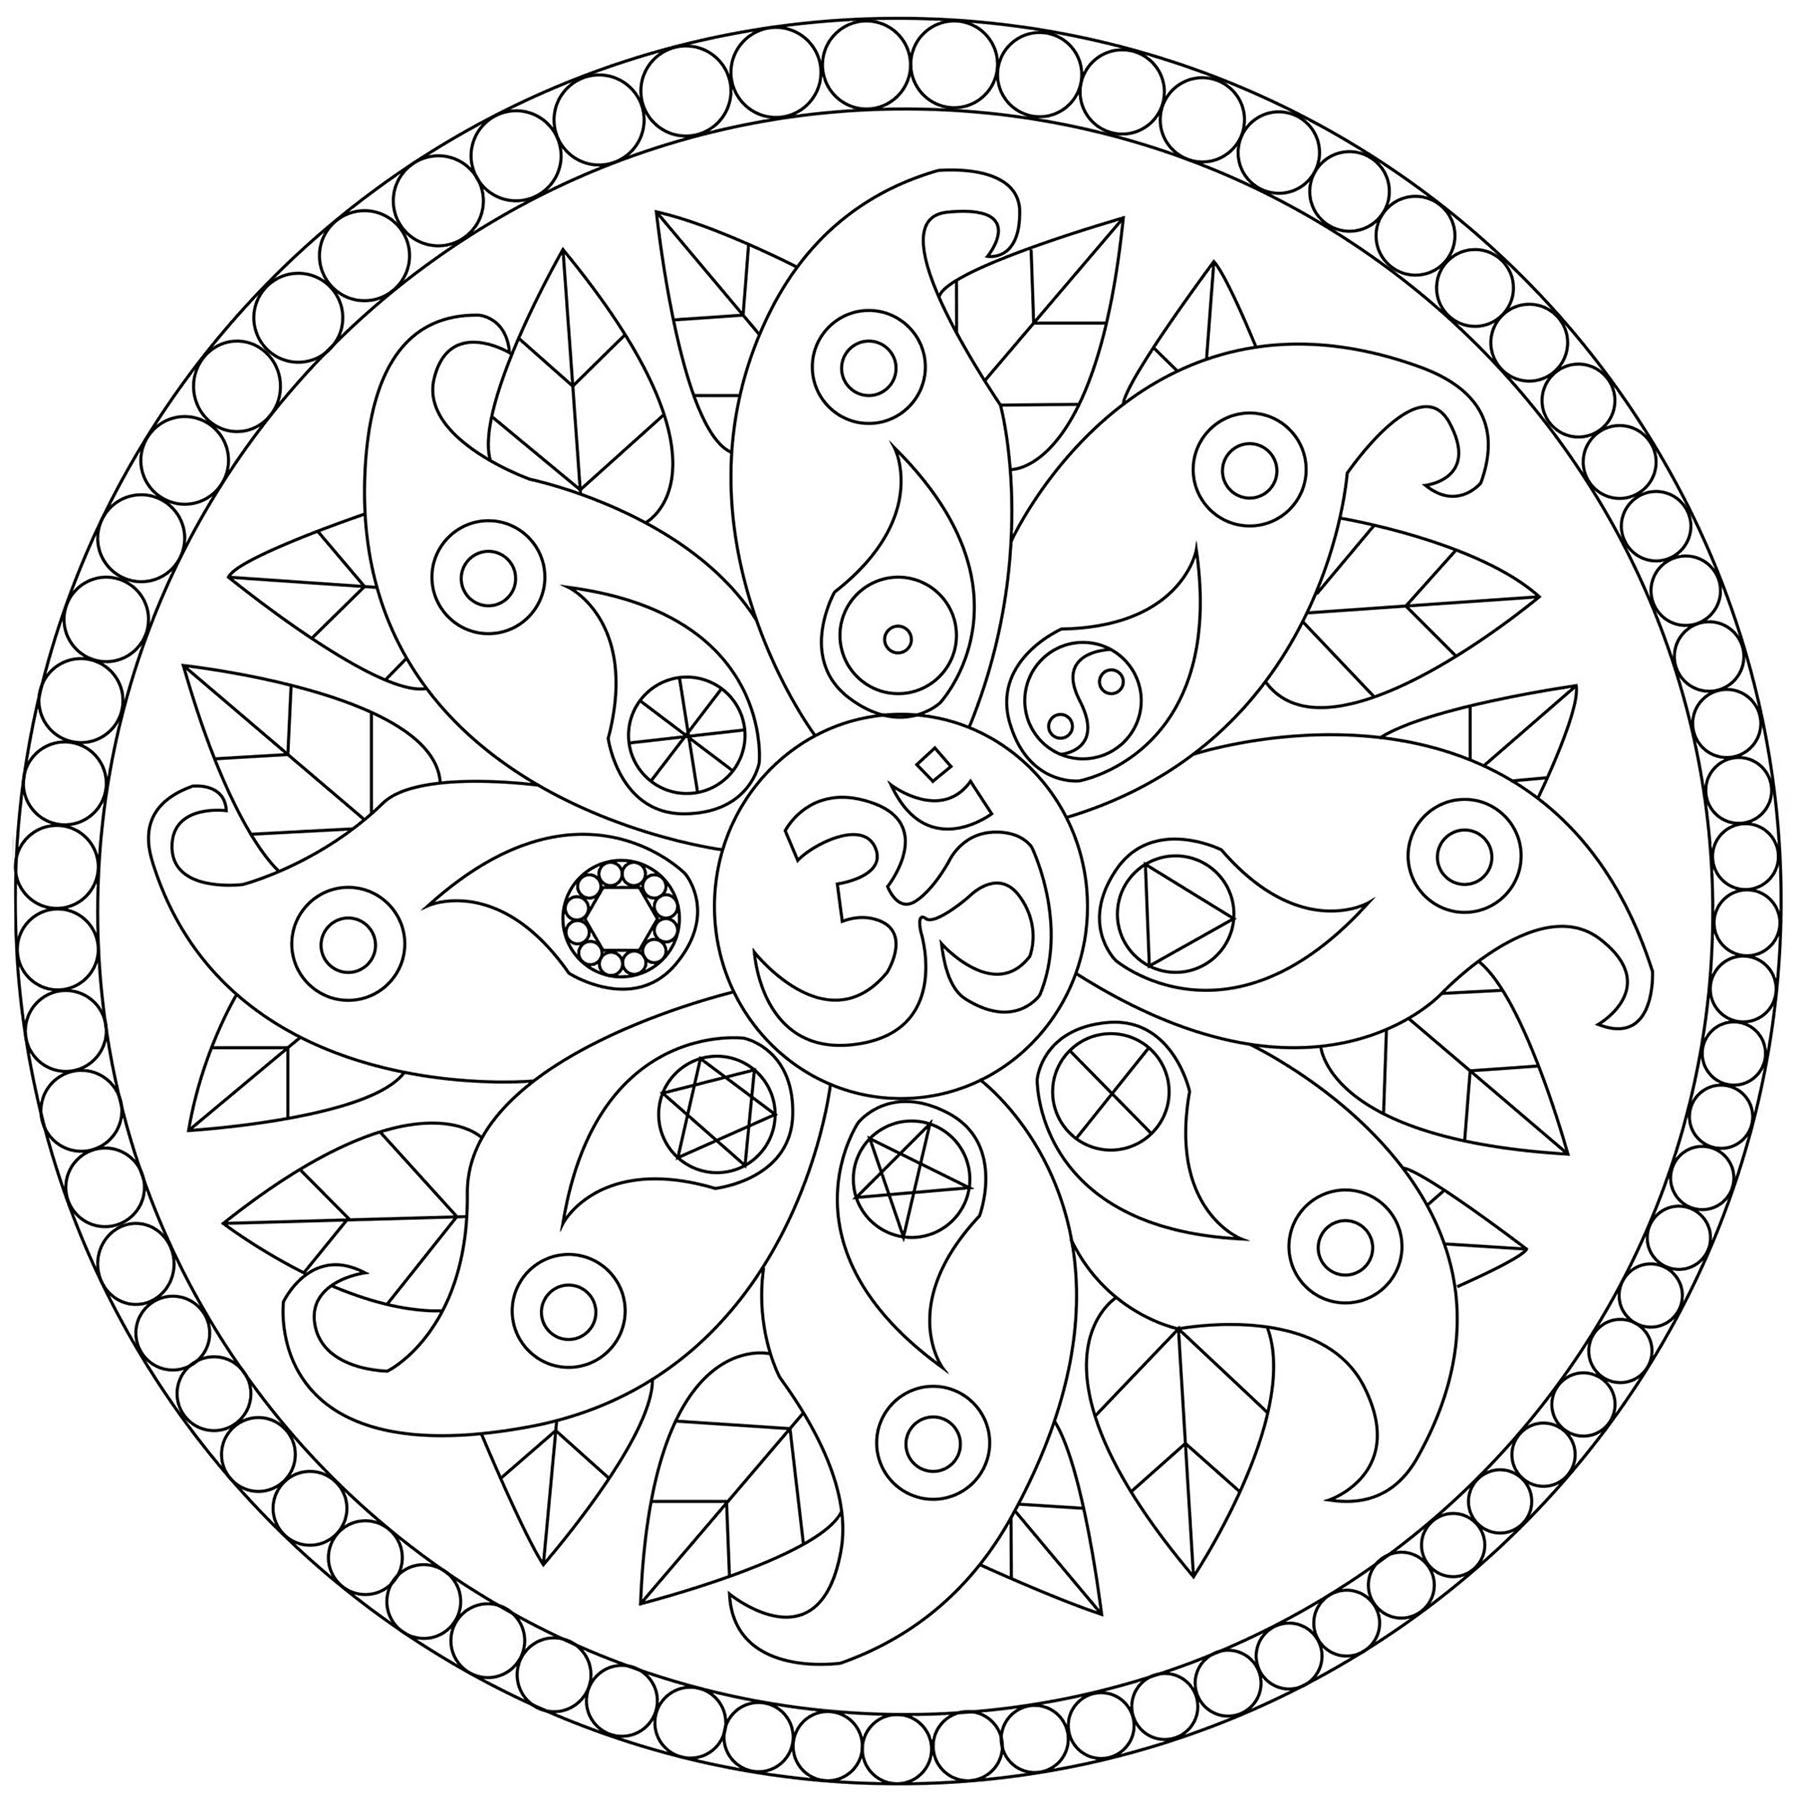 A Mandala with plant motifs and various symbols such as Yin & Yang, Artist : Caillou